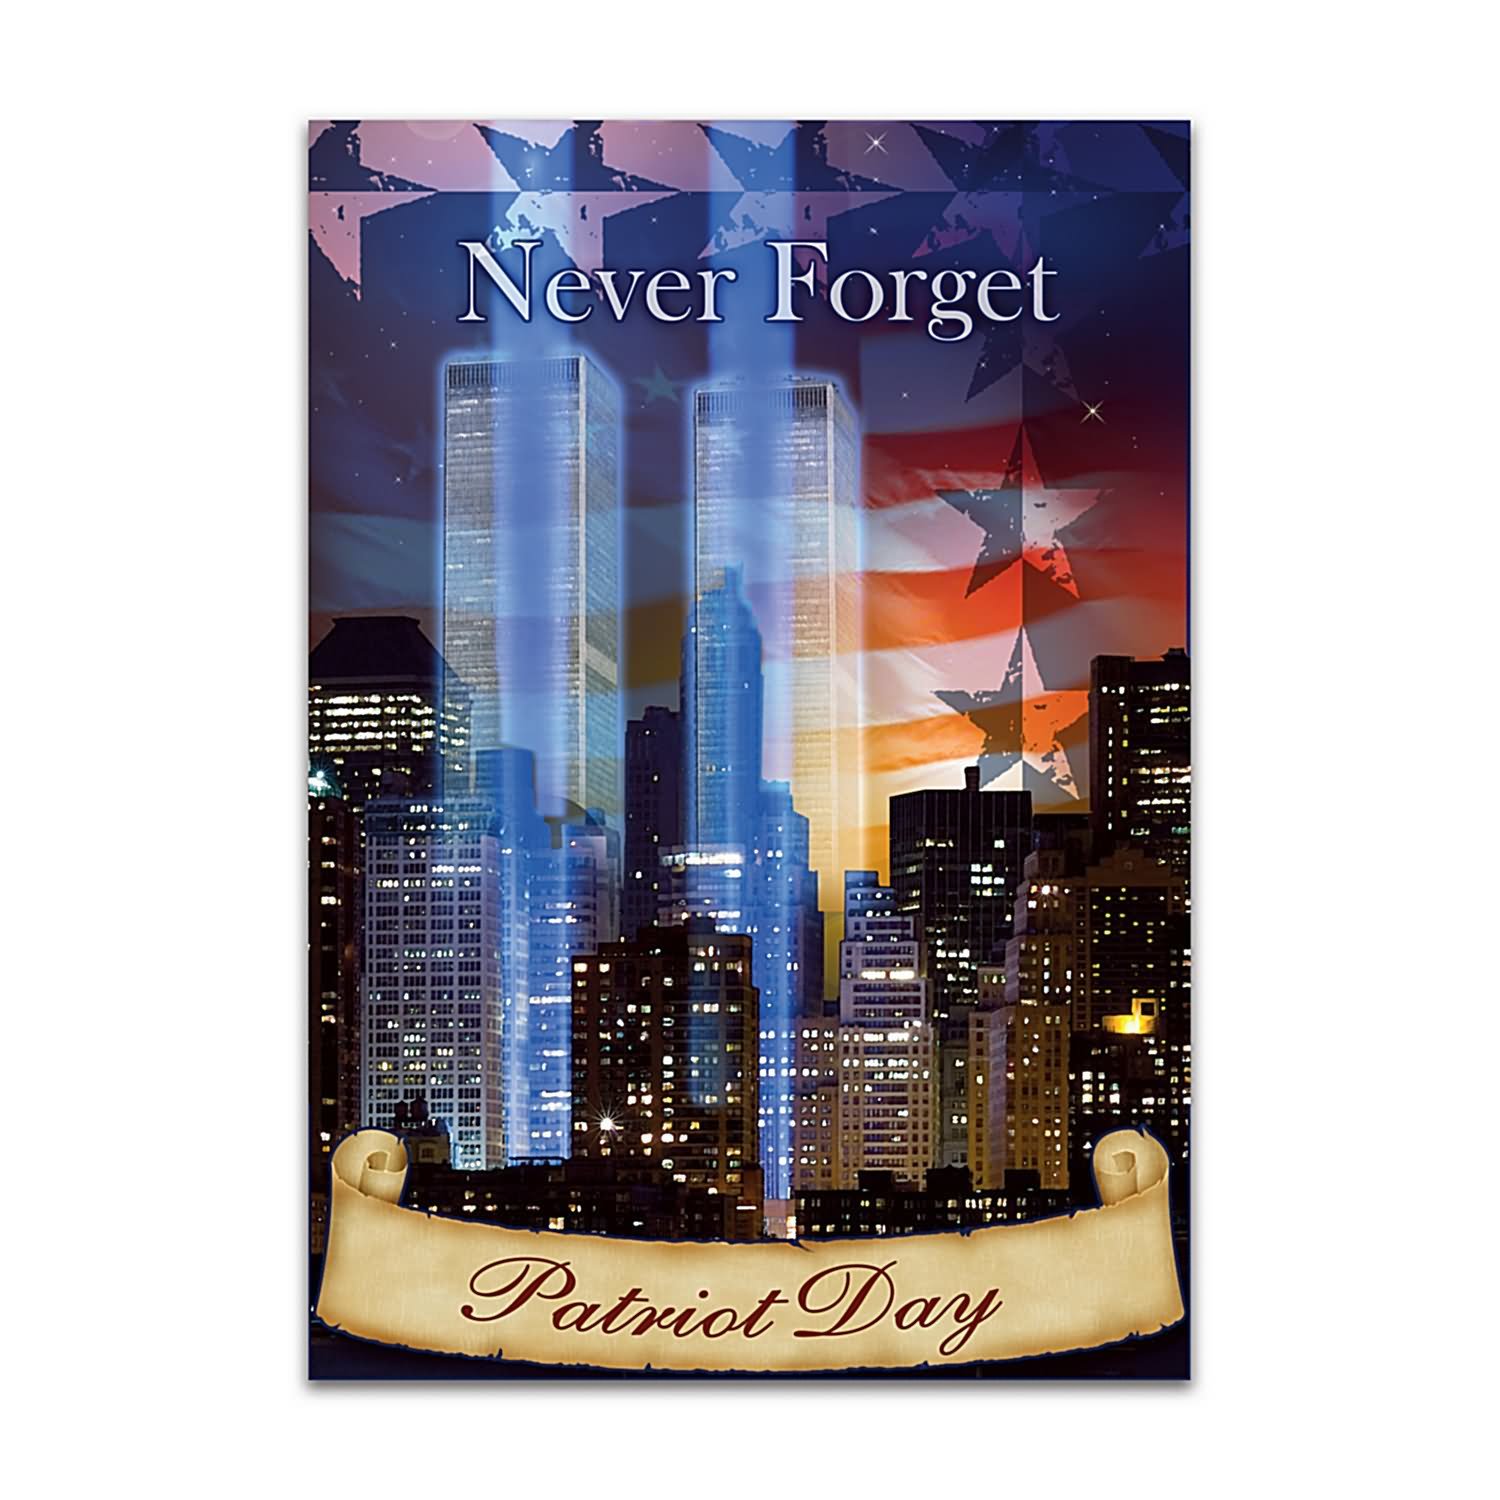 Never Forget Patriot Day Image